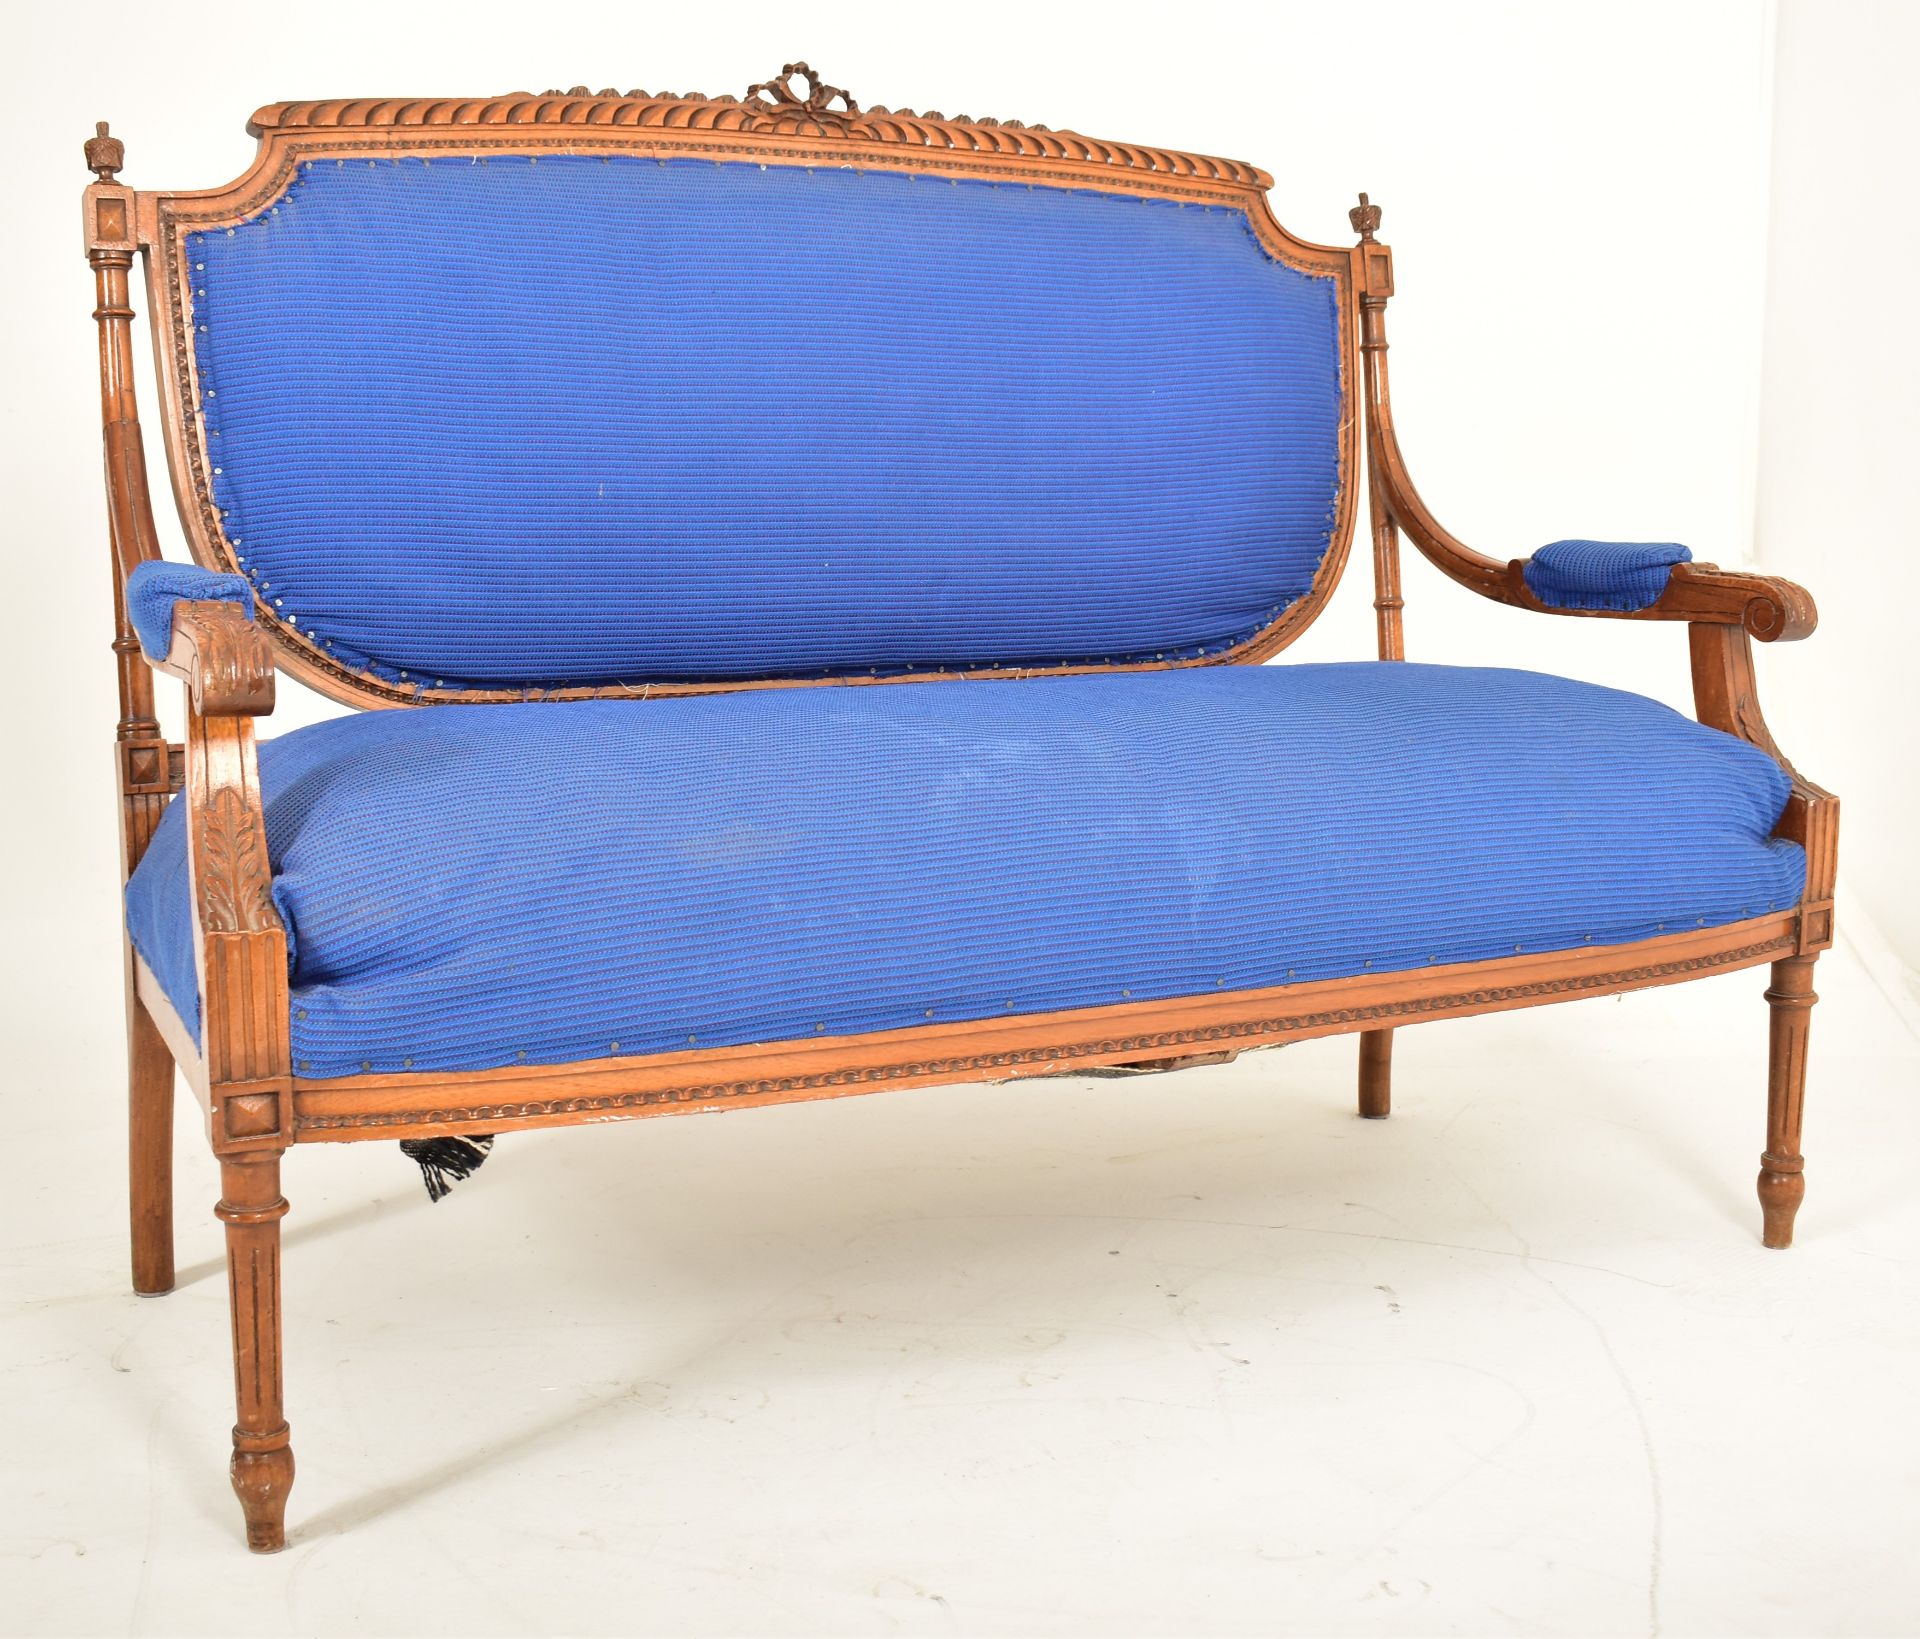 FRENCH LOUIS XVI STYLE CARVED OAK & UPHOLSTERED CANAPE SOFA